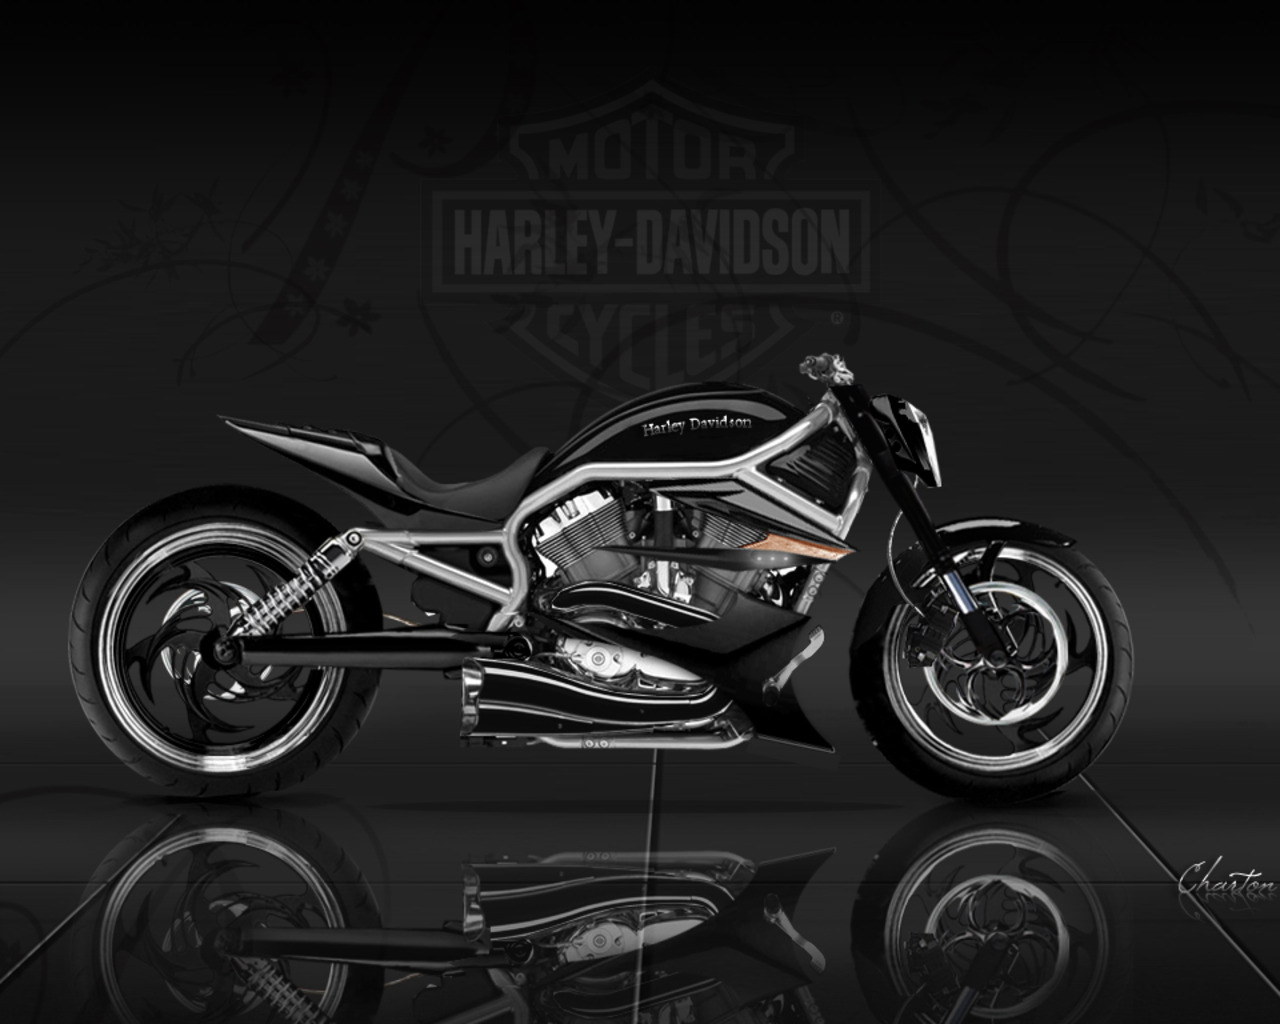  harley davidson right across the street here are some hd wallpapers